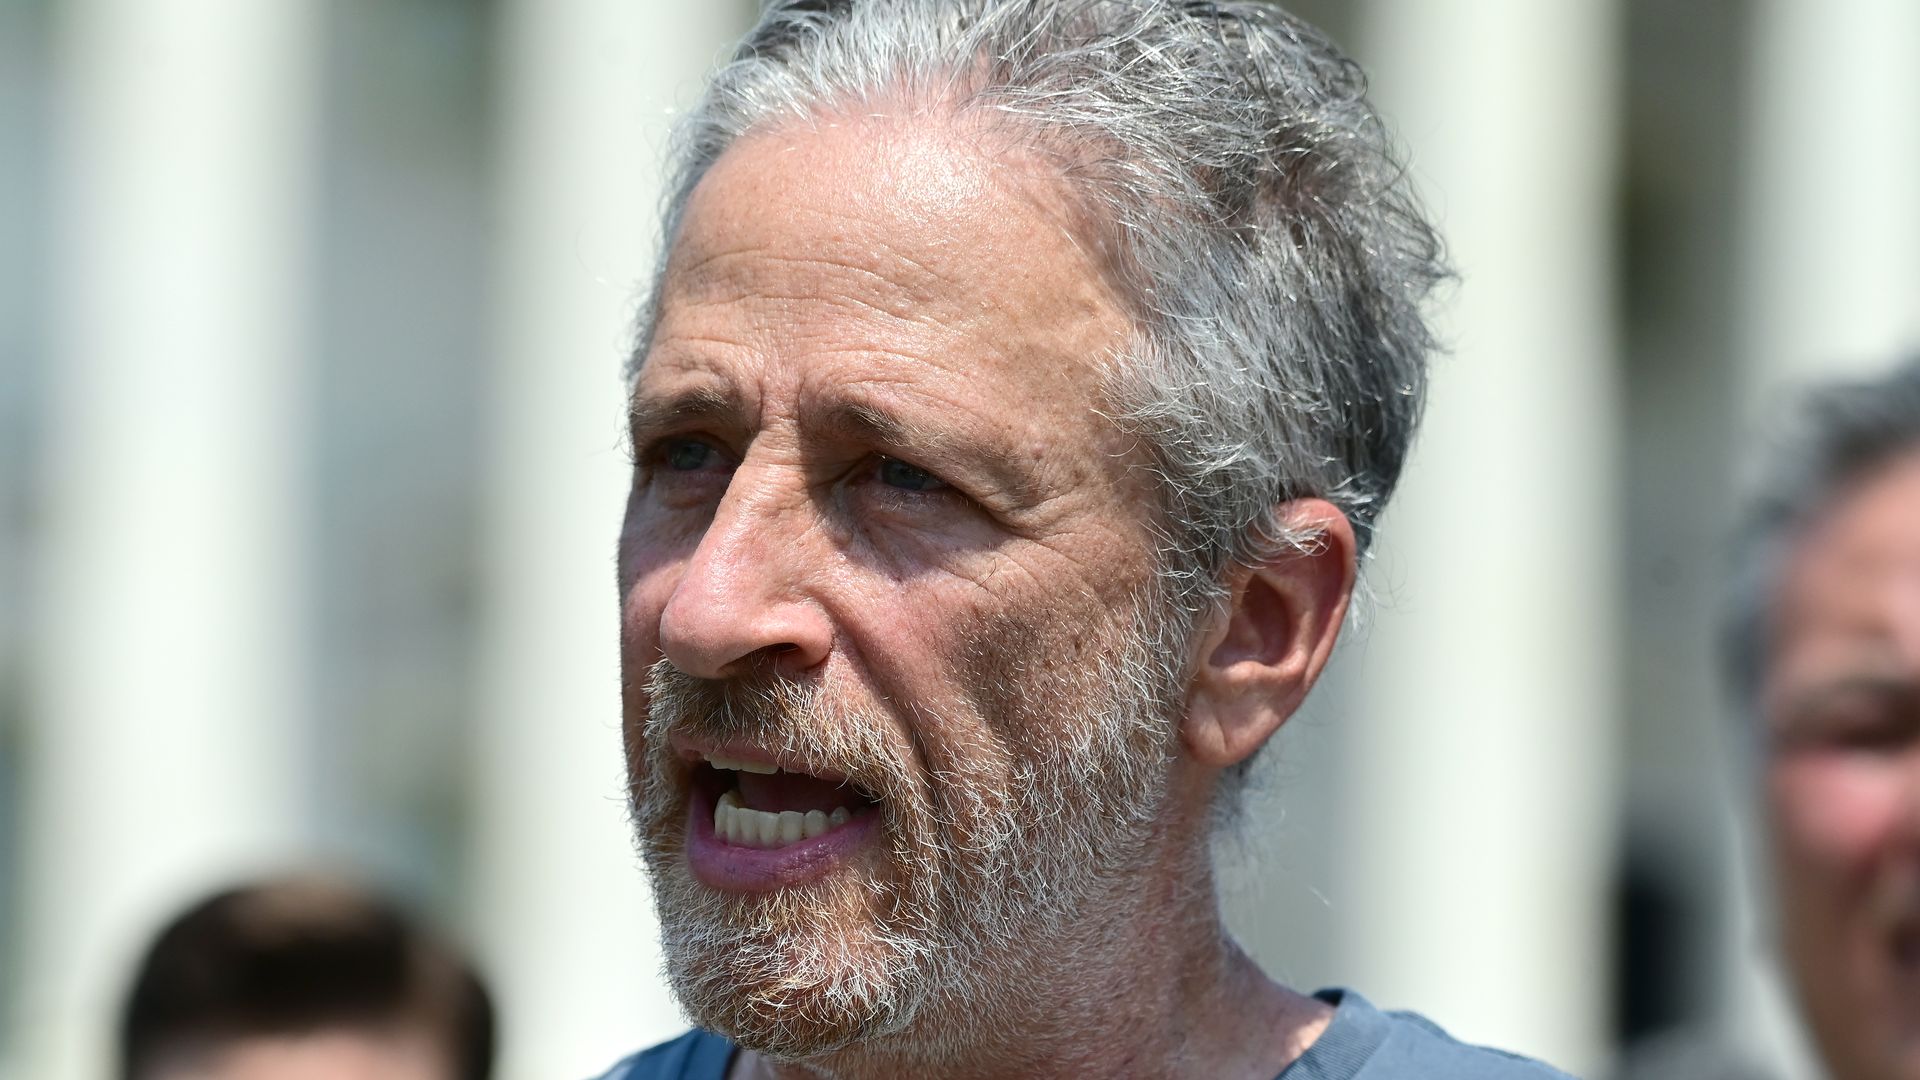 Jon Stewart speaks at a press conference for "Honoring our PACT Act: Promise to Address Comprehensive Toxins" at House Triangle on May 26, 2021 in Washington, DC.